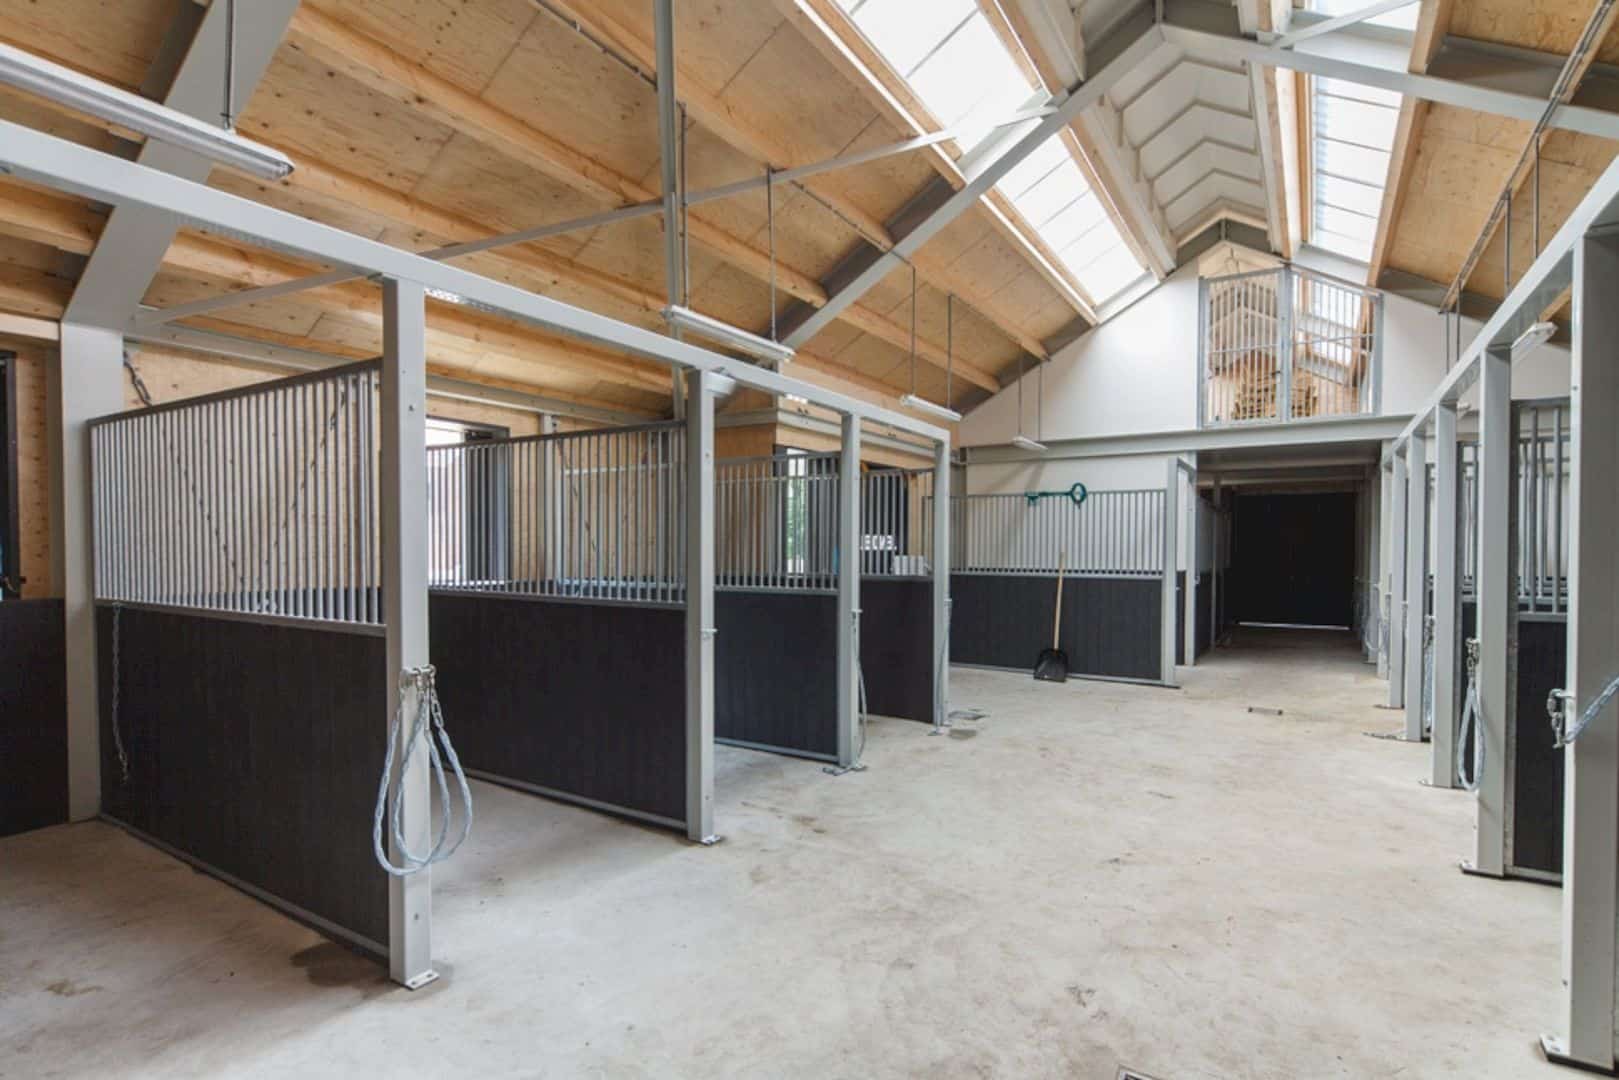 Meijendel Visitors Center & Stables Designing A New Stable In Style 7